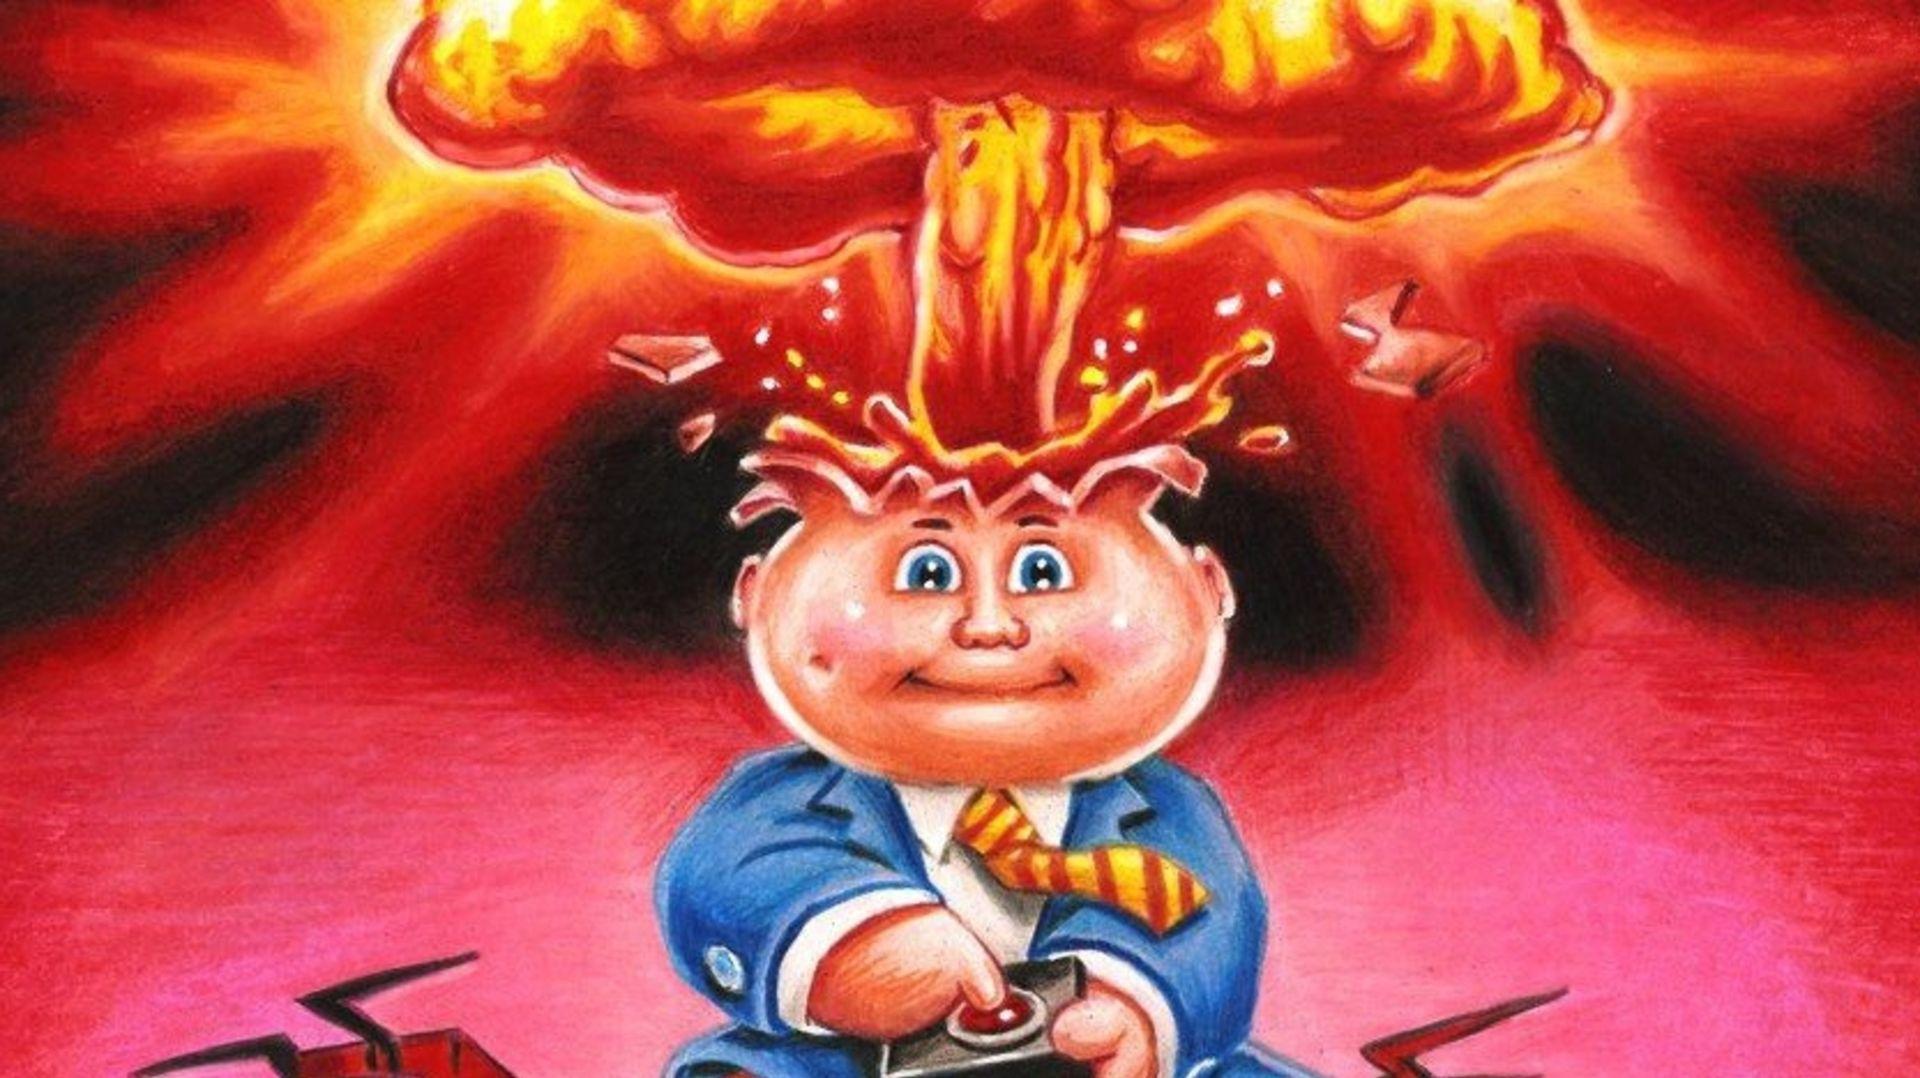 Notorious 80s trading card series Garbage Pail Kids is being